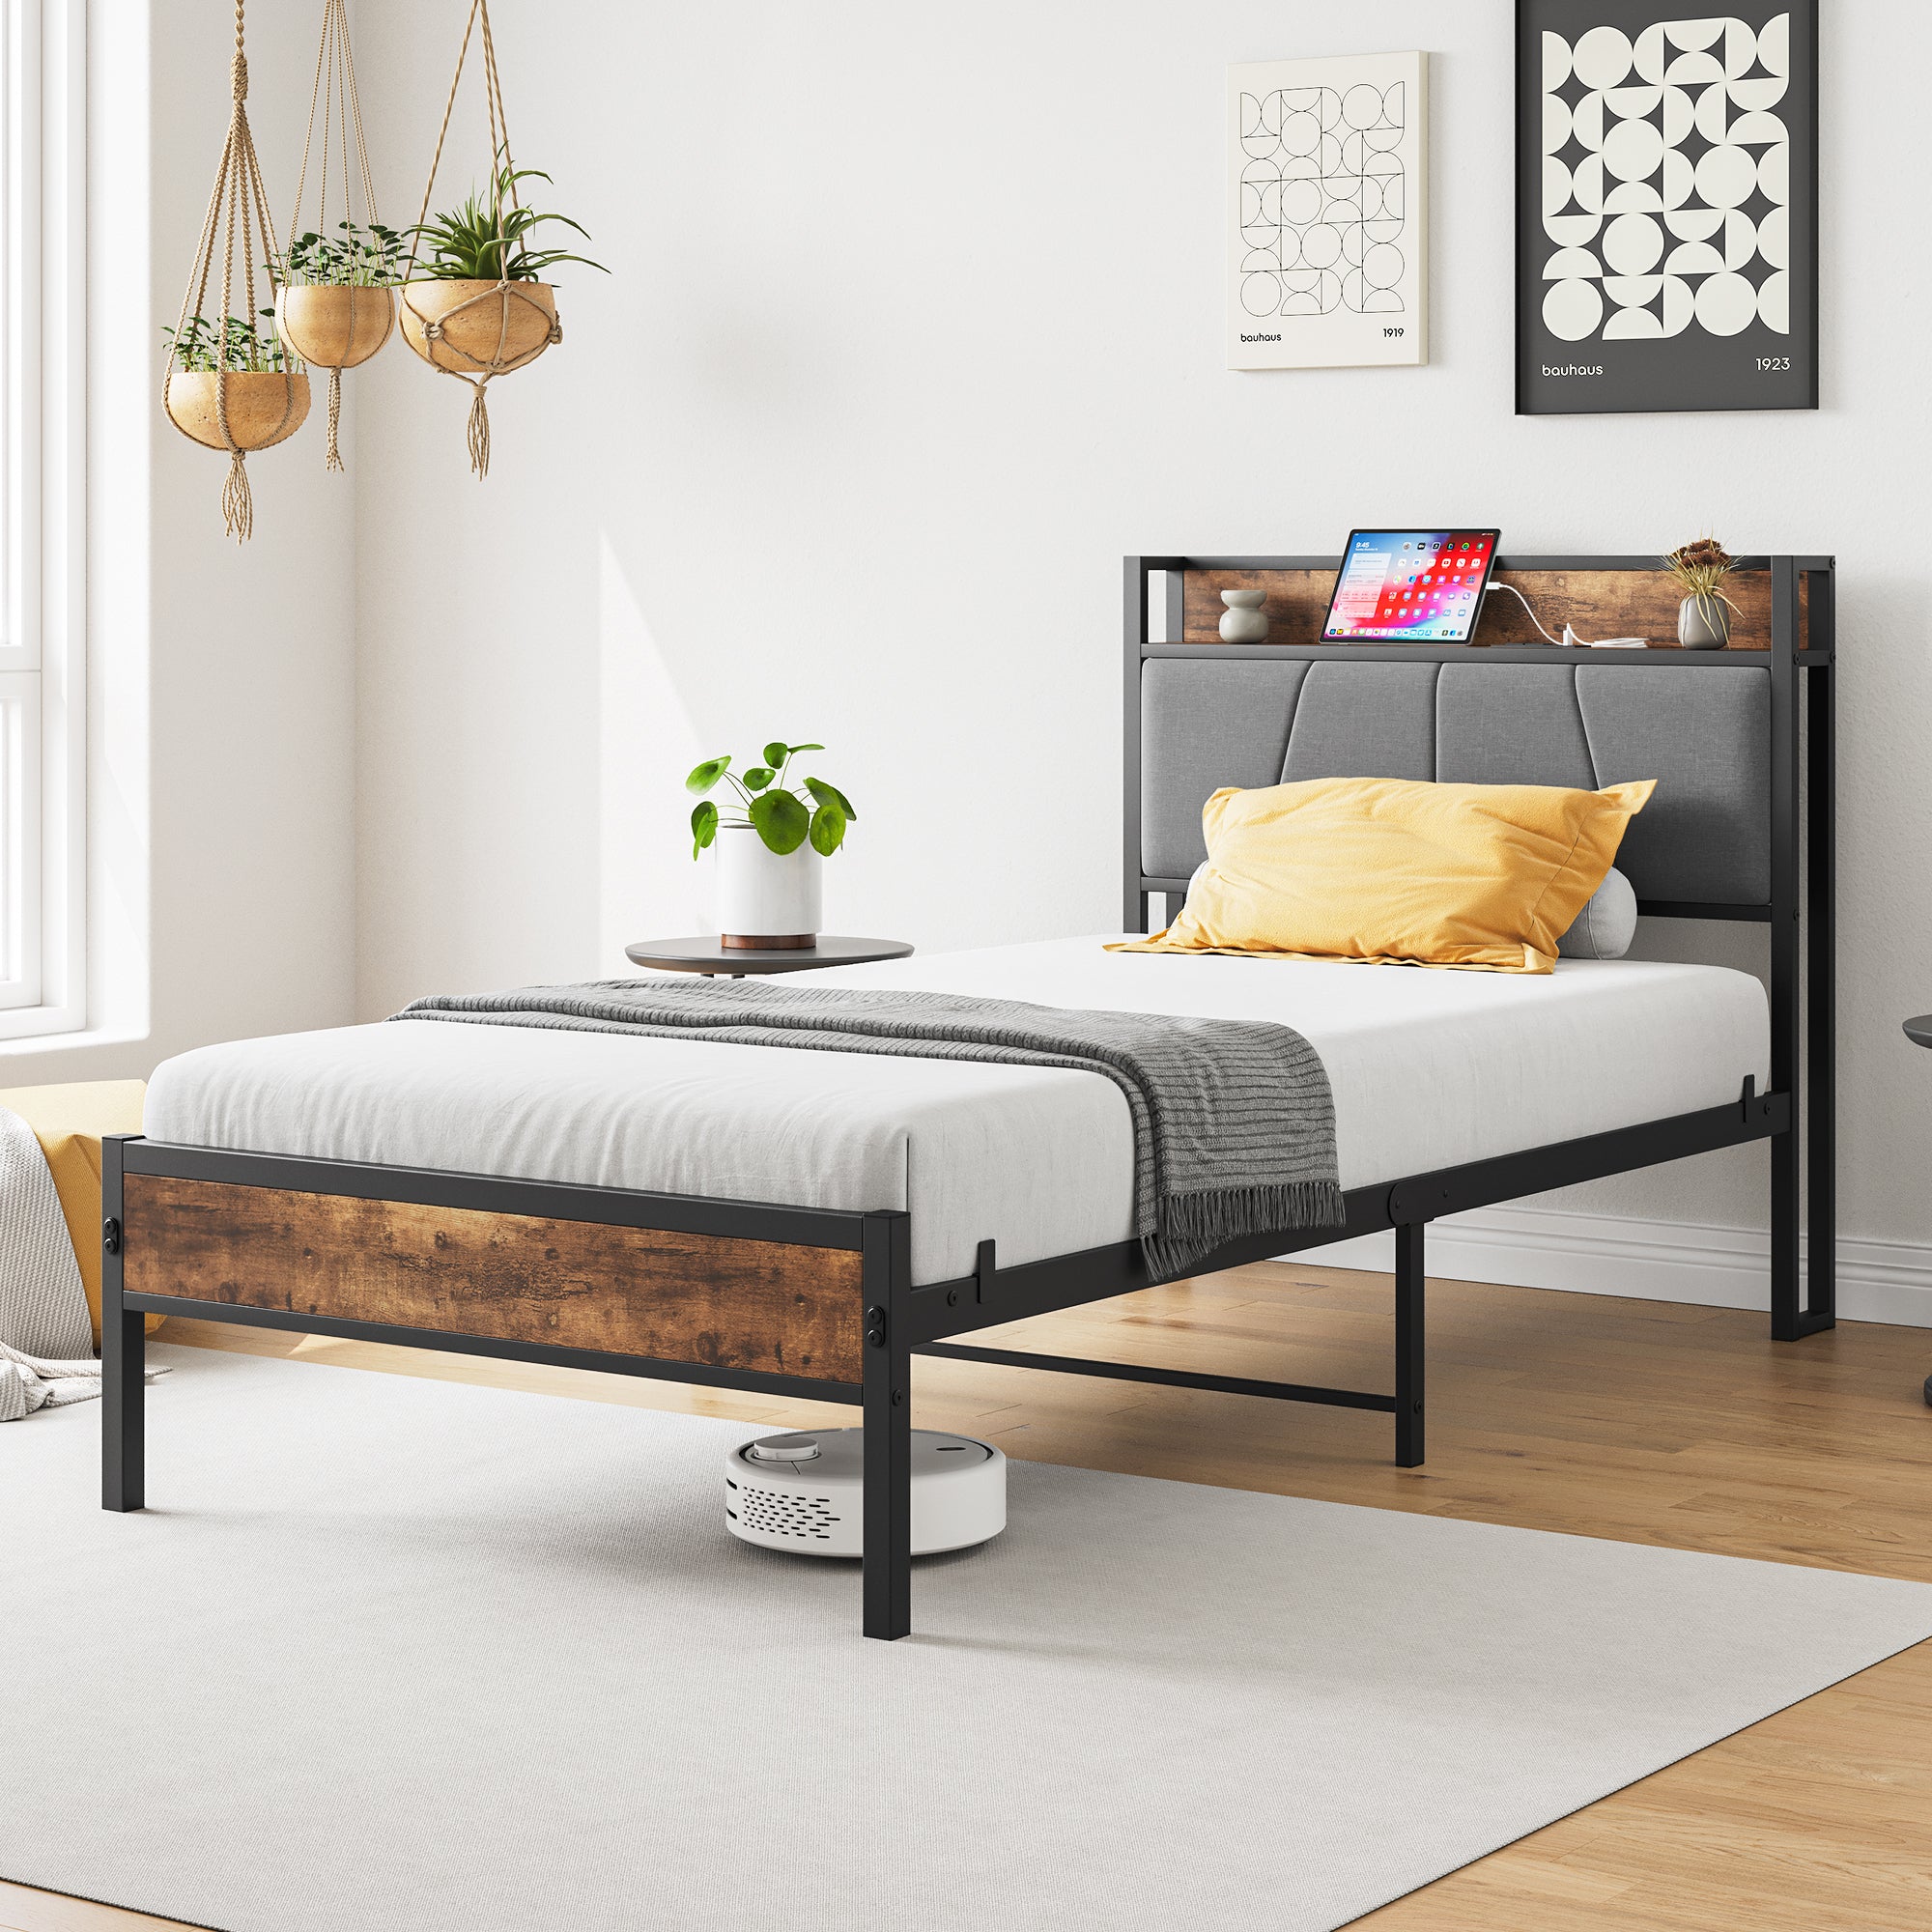 Twin Size Bed Frame, Storage Headboard with Charging box spring not